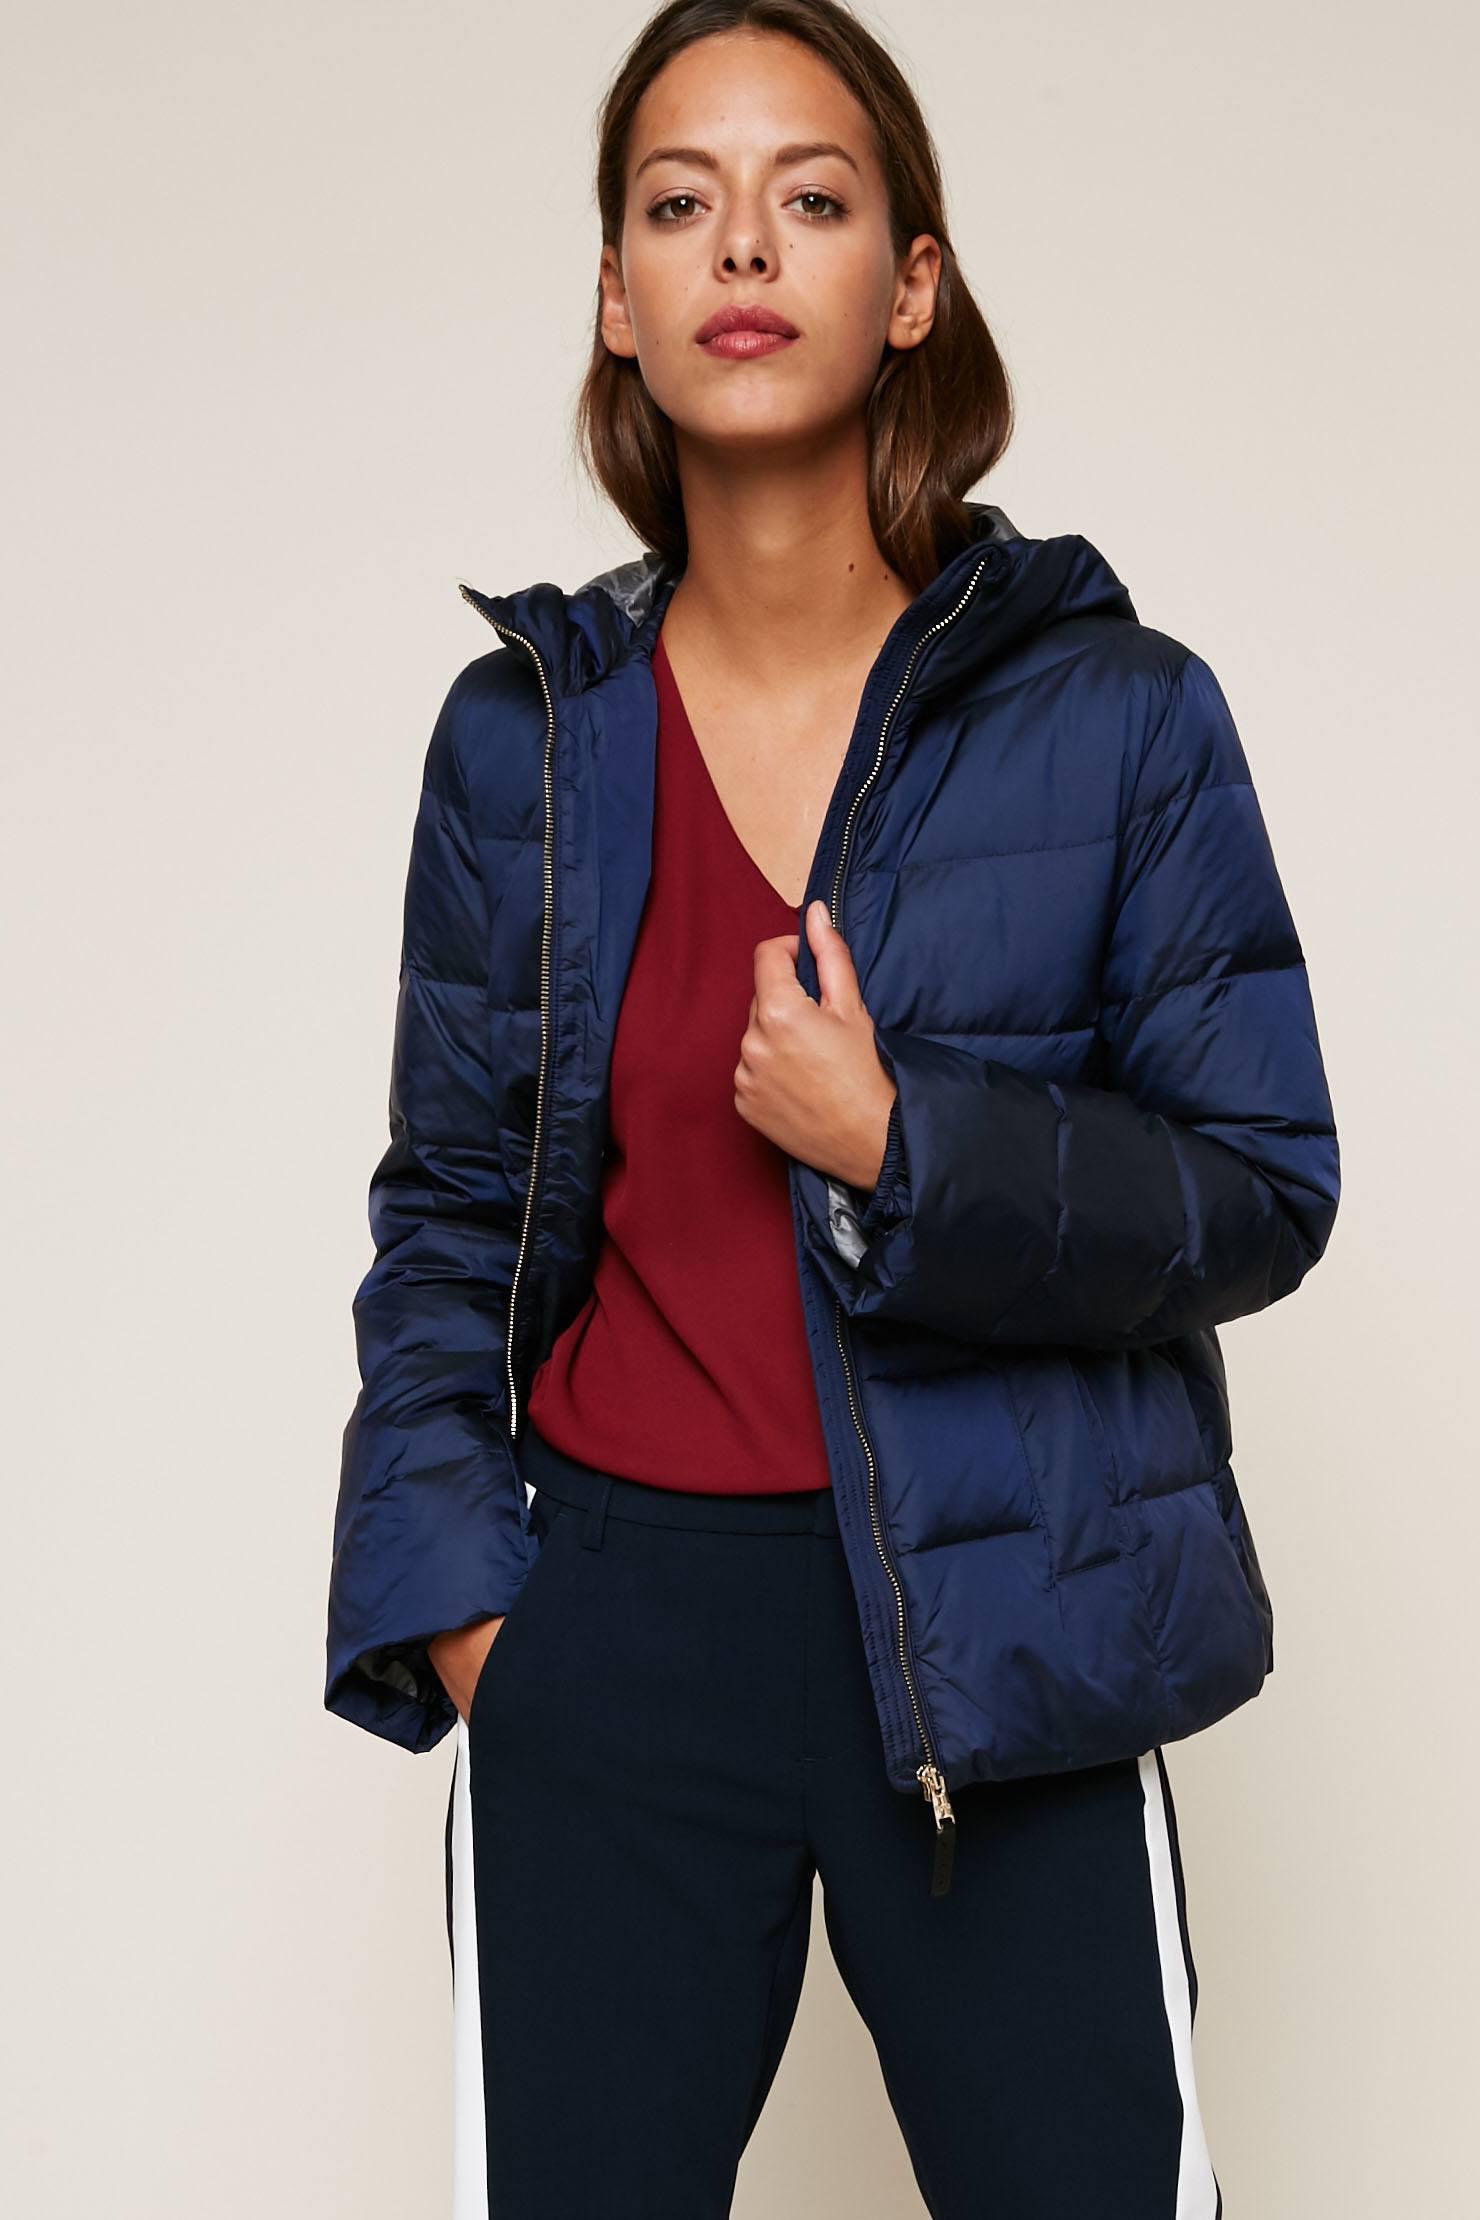 Lyst - Esprit Quilted Jacket in Blue